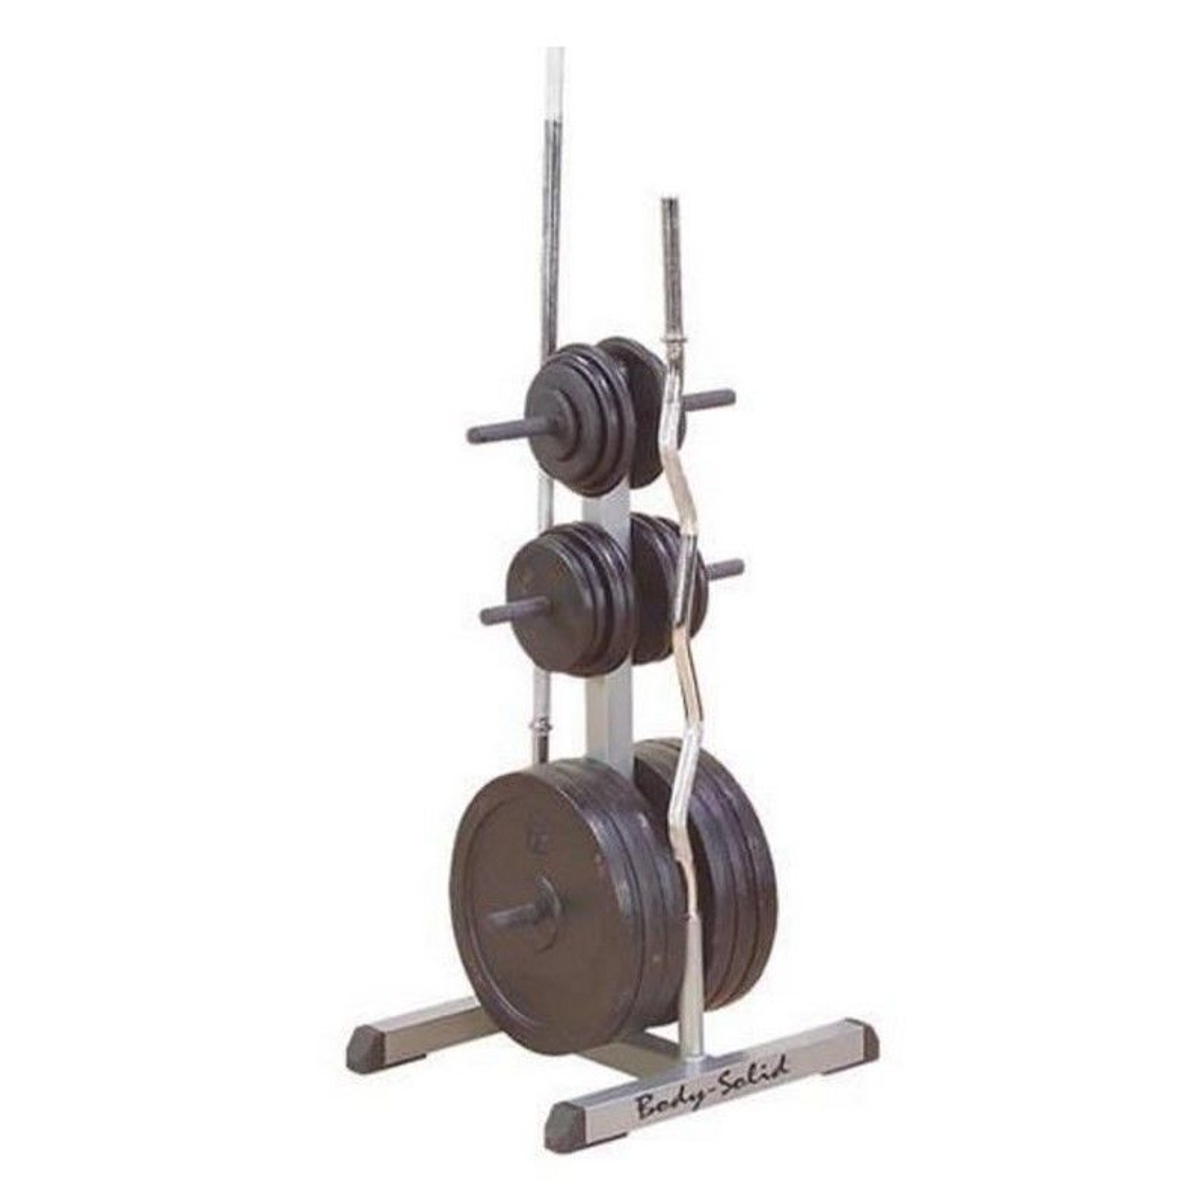 Body-Solid Standard Plate Tree & Bar Holder GSWT 